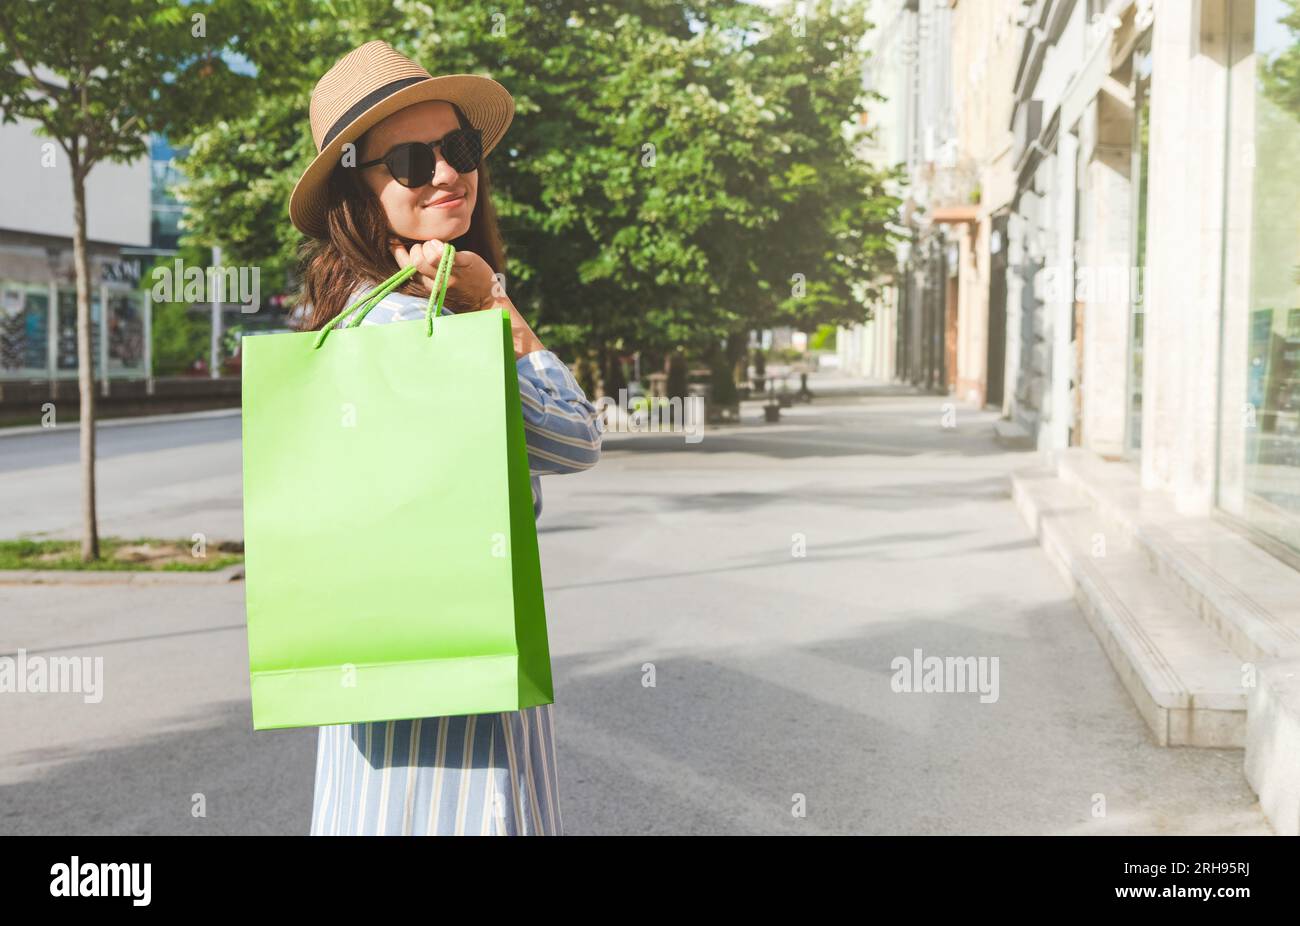 Elegant Young Woman With Shopping Bags Standing On The Street Stock Photo -  Download Image Now - iStock